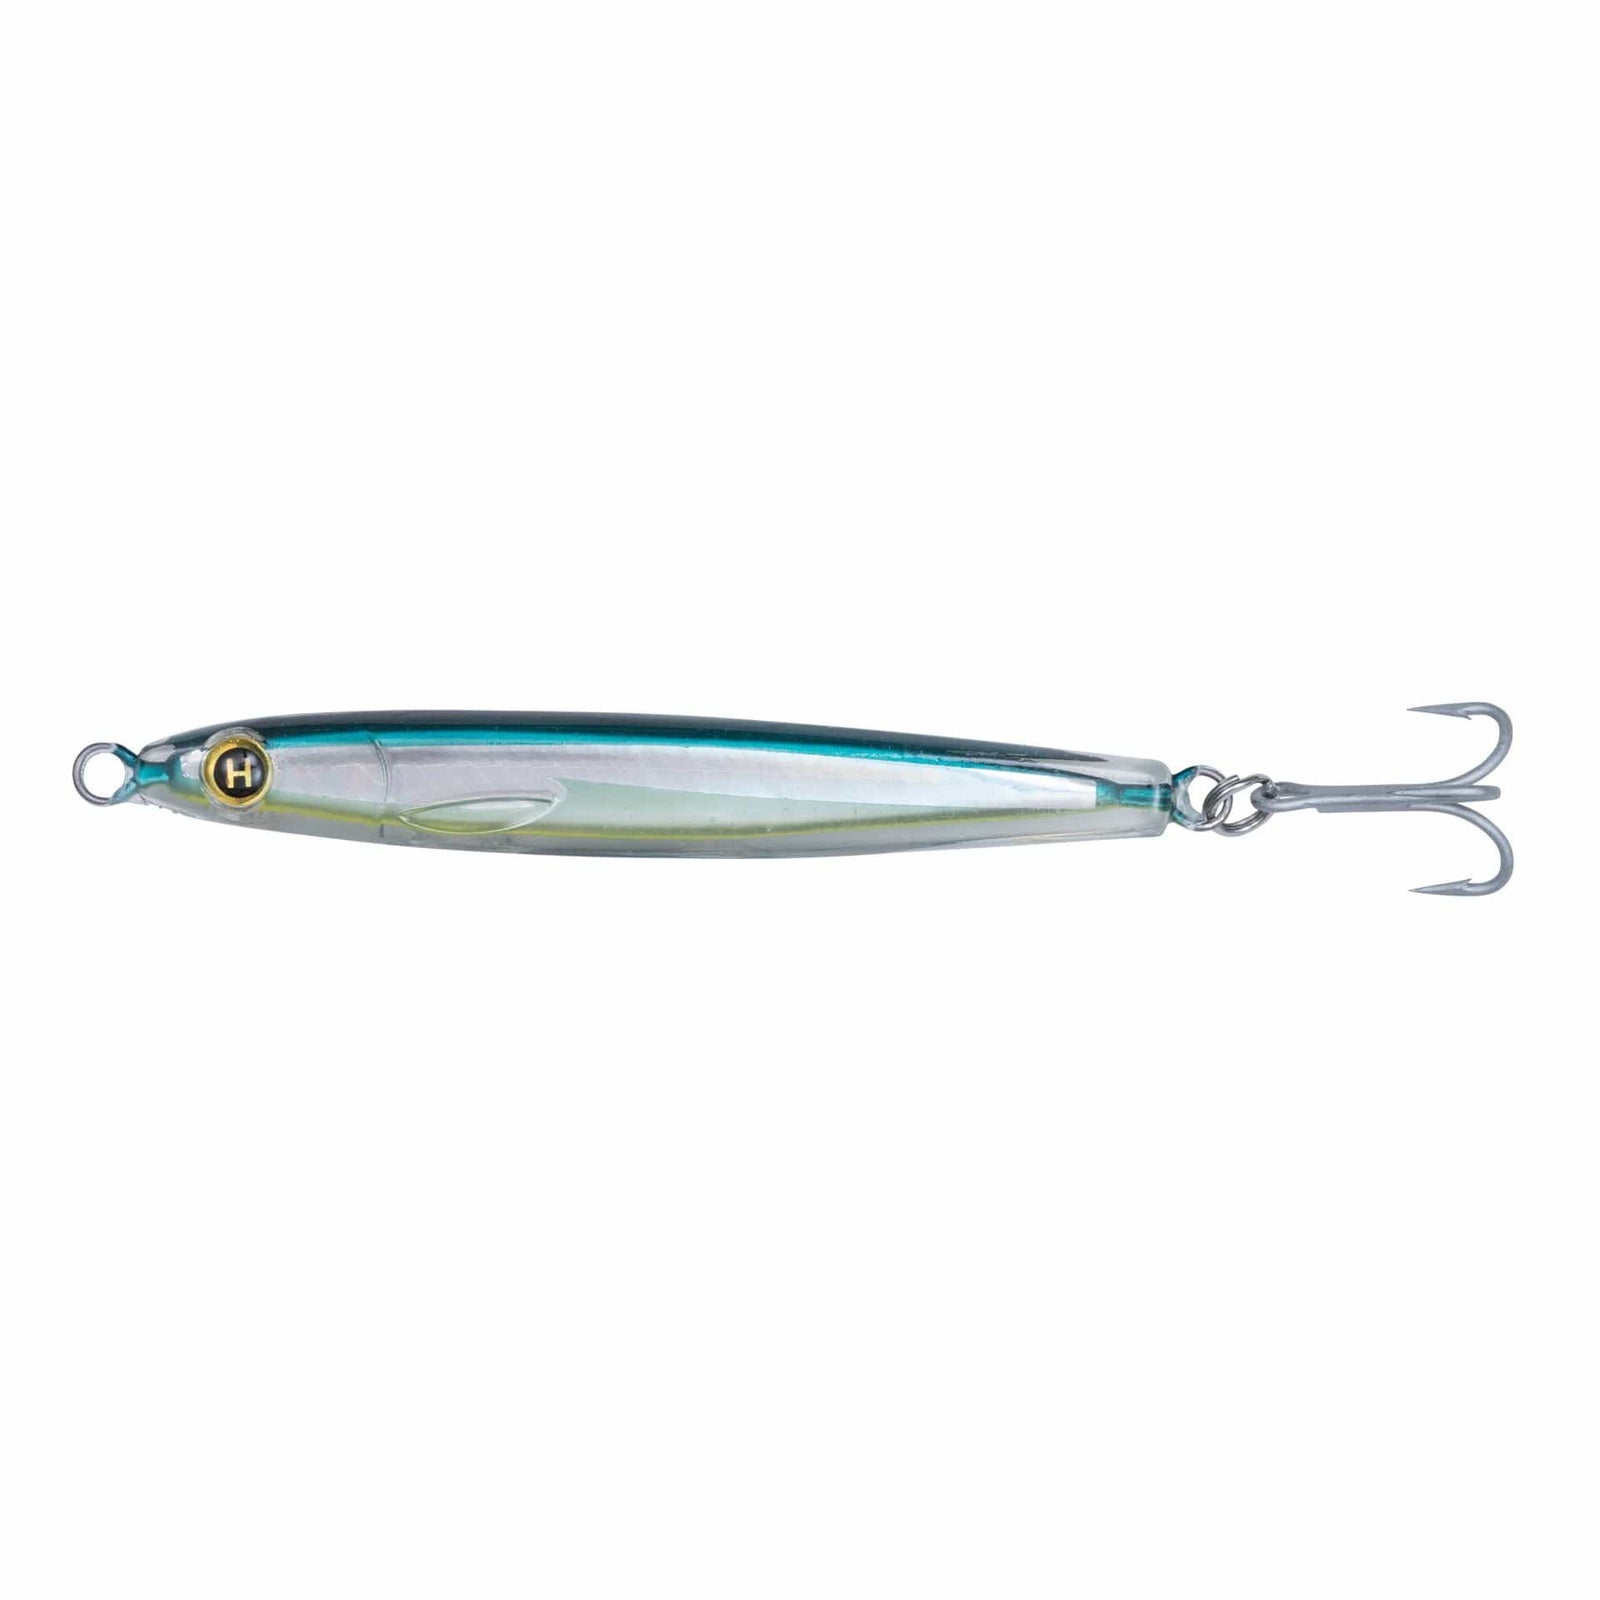 Top Lure Brands - The Saltwater Edge